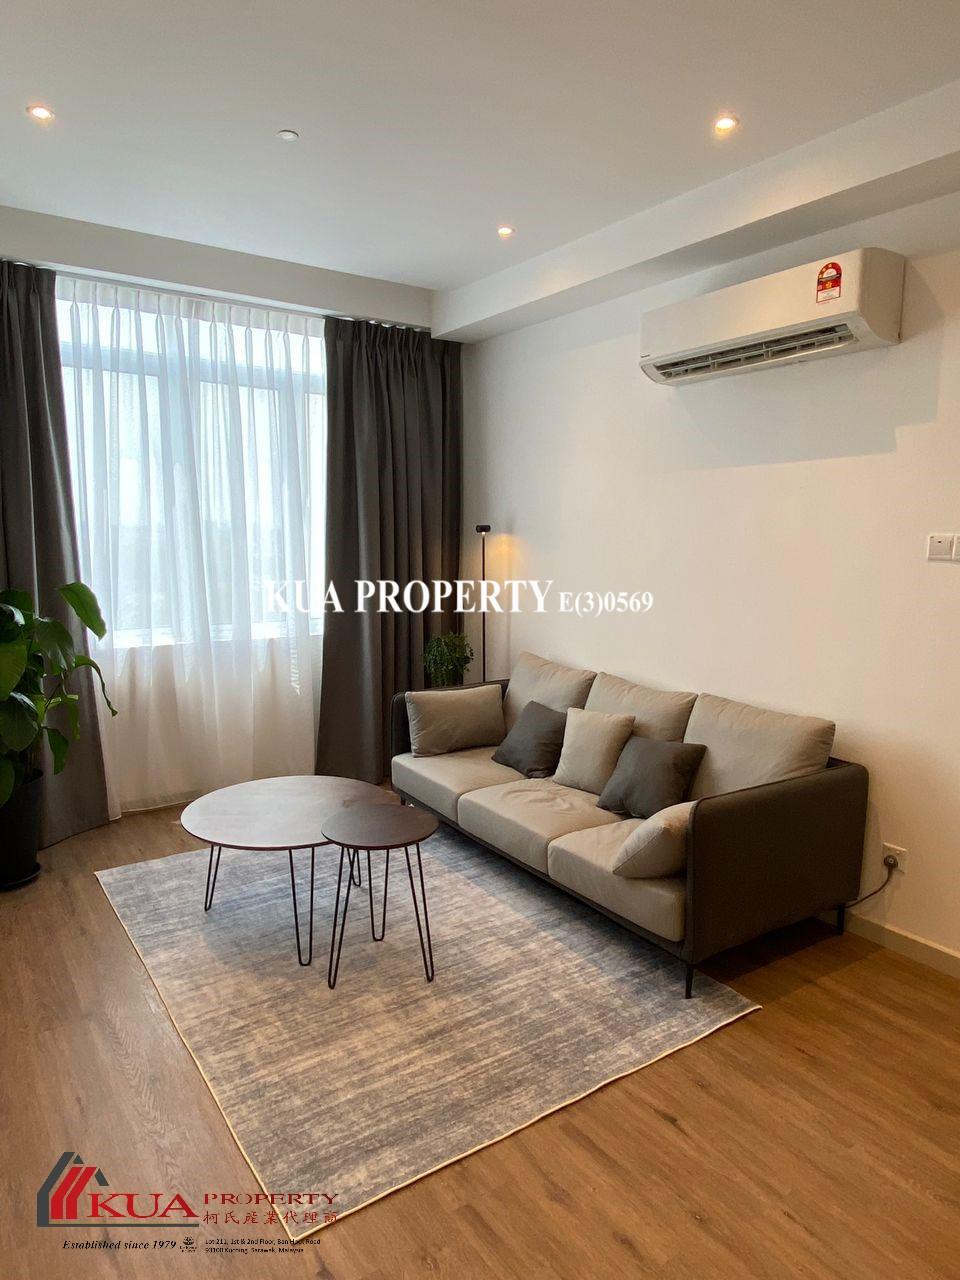 Avona Residence Apartment For Rent! at Northbank, Tabuan Tranquility